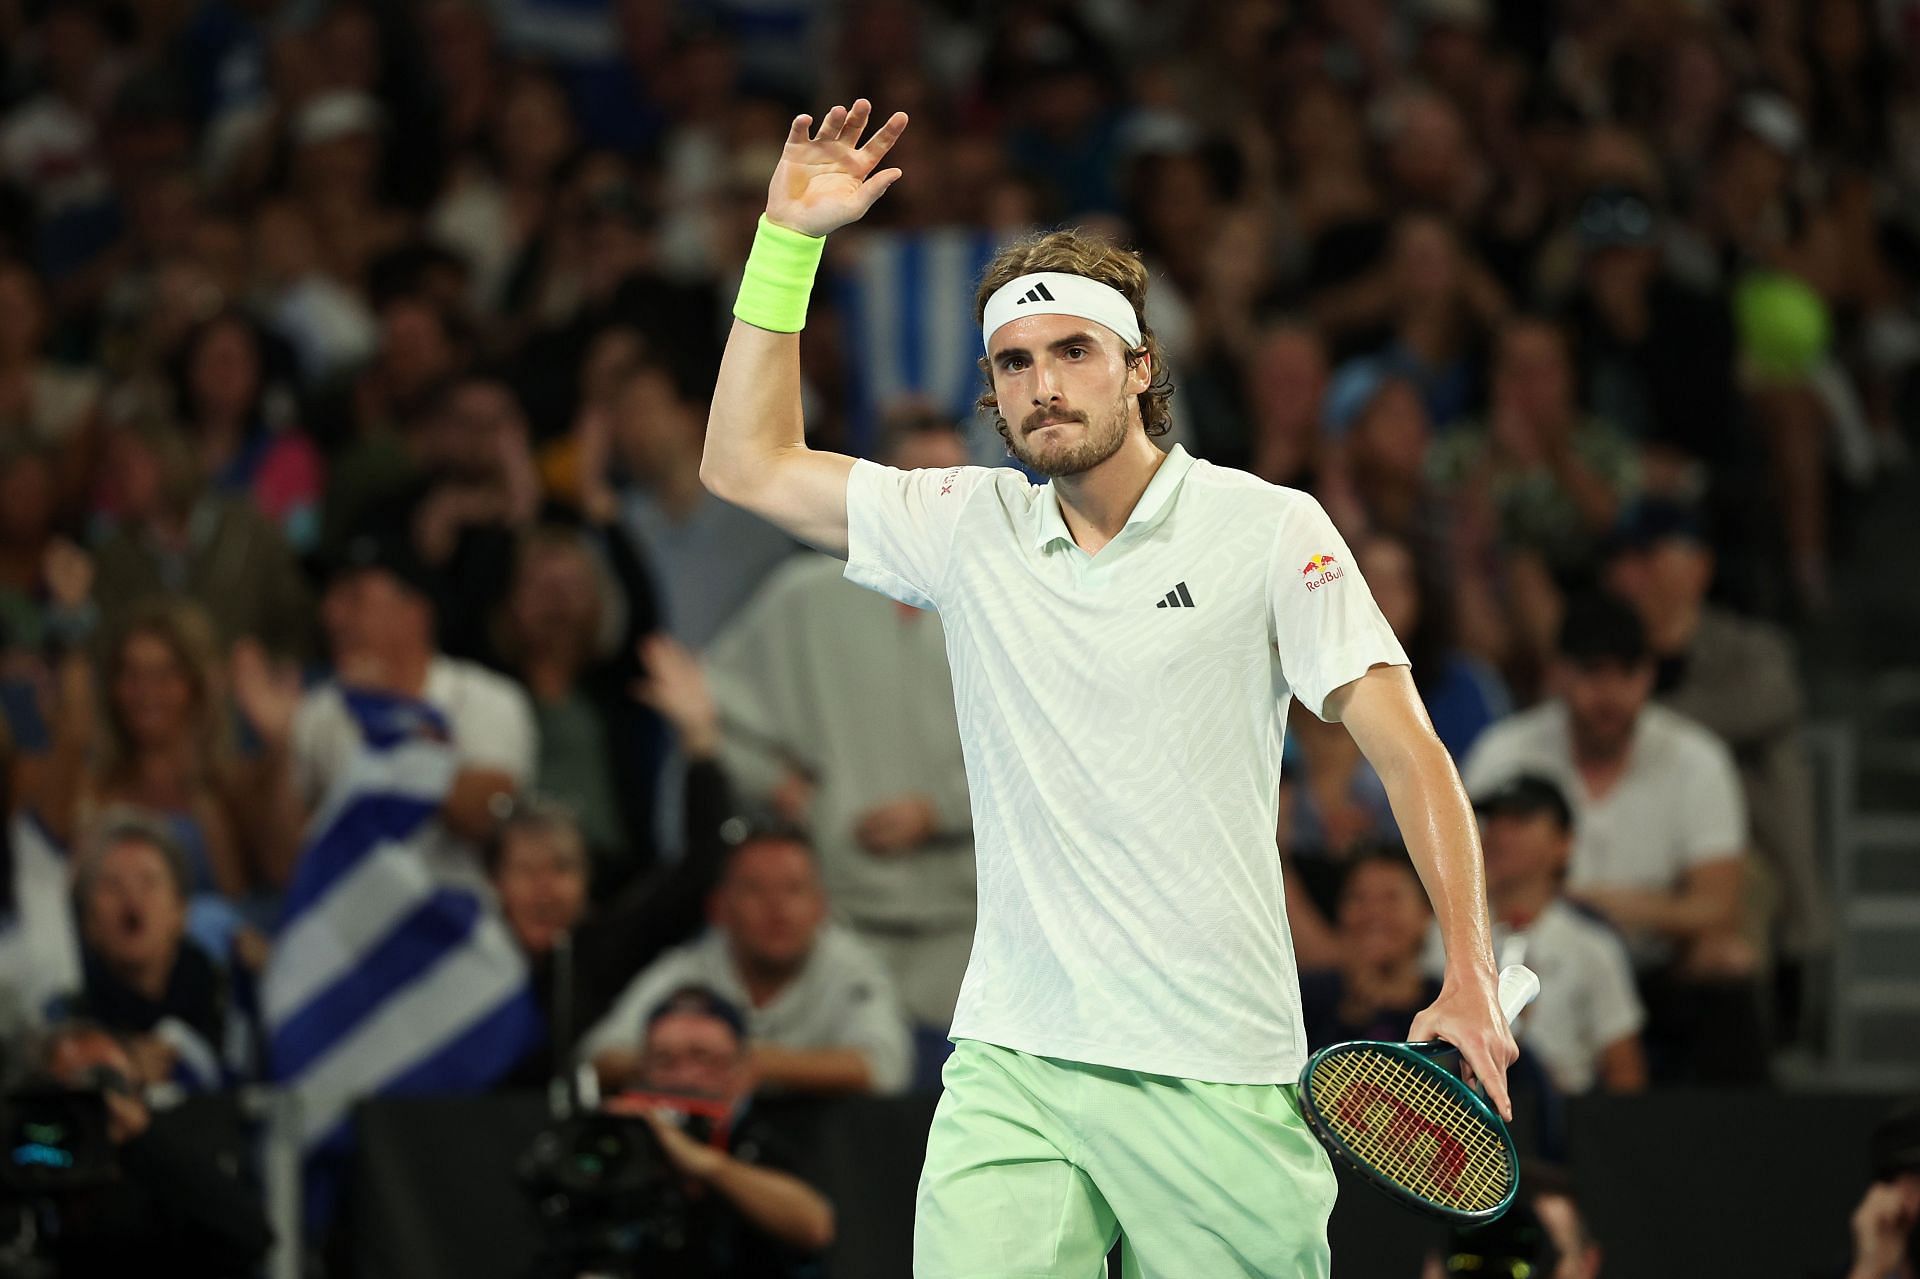 Stefanos Tsitsipas is the defending champion at the Los Cabos Open.